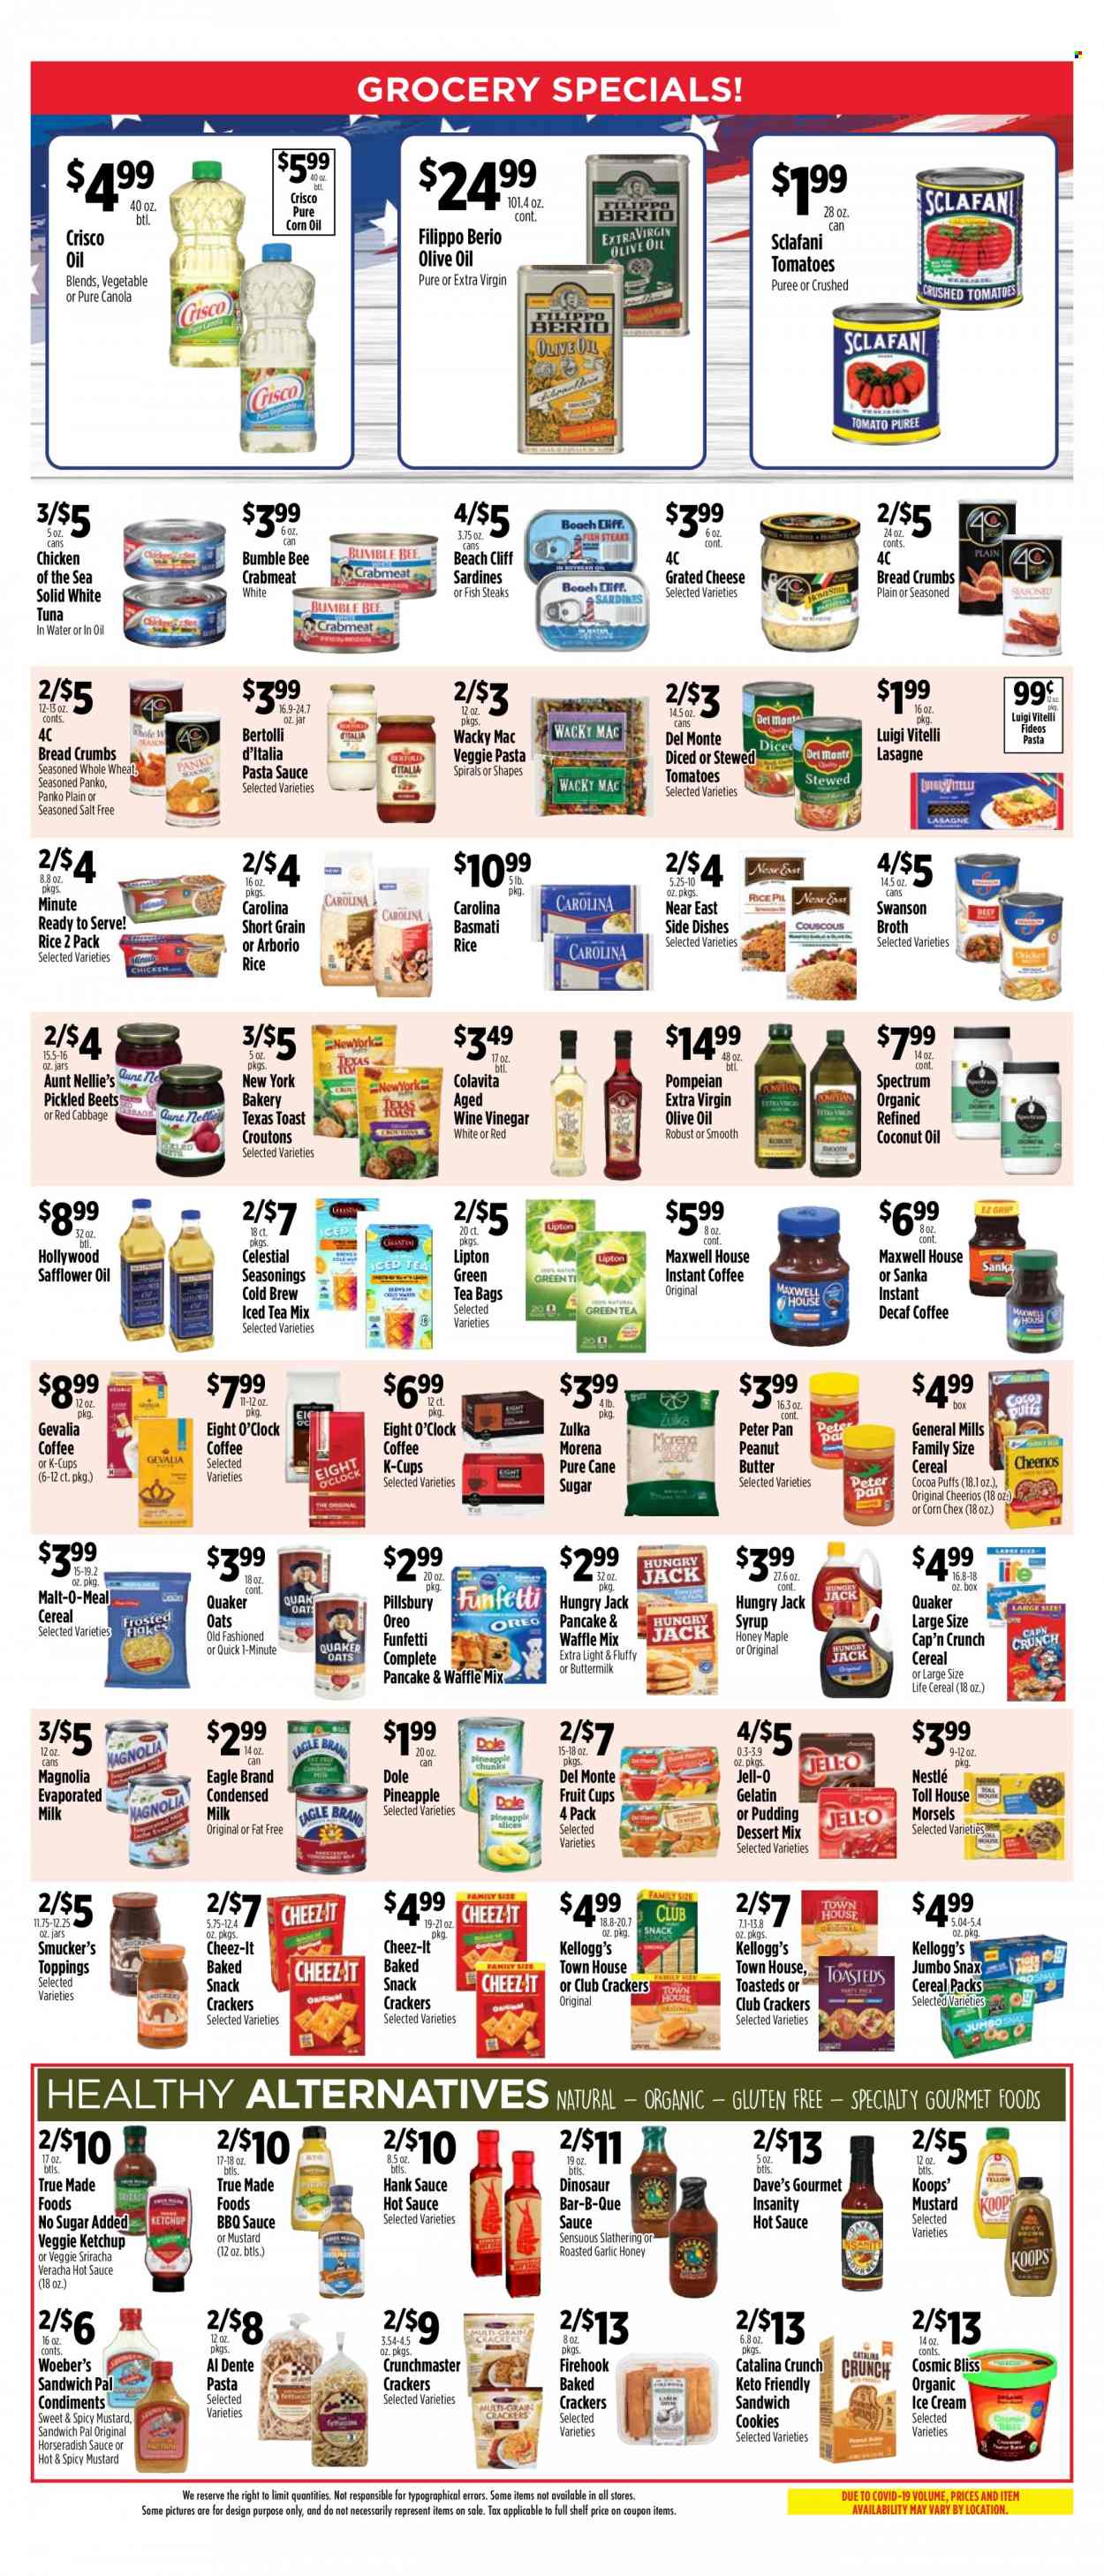 thumbnail - Pioneer Supermarkets Flyer - 05/21/2023 - 05/27/2023 - Sales products - puffs, dessert, breadcrumbs, panko breadcrumbs, cabbage, horseradish, Dole, pineapple, fruit cup, crab meat, sardines, tuna, fish steak, pasta sauce, sandwich, Bumble Bee, sauce, pancakes, Pillsbury, Quaker, Bertolli, cheese, grated cheese, pudding, Oreo, buttermilk, evaporated milk, condensed milk, sandwich cookies, ice cream, cookies, Nestlé, snack, crackers, Kellogg's, Cheez-It, cane sugar, Crisco, croutons, oats, Jell-O, broth, Chicken of the Sea, Del Monte, canned fish, cereals, Cheerios, Cap'n Crunch, basmati rice, rice, BBQ sauce, mustard, sriracha, hot sauce, ketchup, coconut oil, corn oil, extra virgin olive oil, safflower oil, vinegar, wine vinegar, olive oil, honey, peanut butter, syrup, Lipton, water, Maxwell House, tea bags, coffee, instant coffee, K-Cups, Gevalia, Eight O'Clock, alcohol, steak. Page 3.